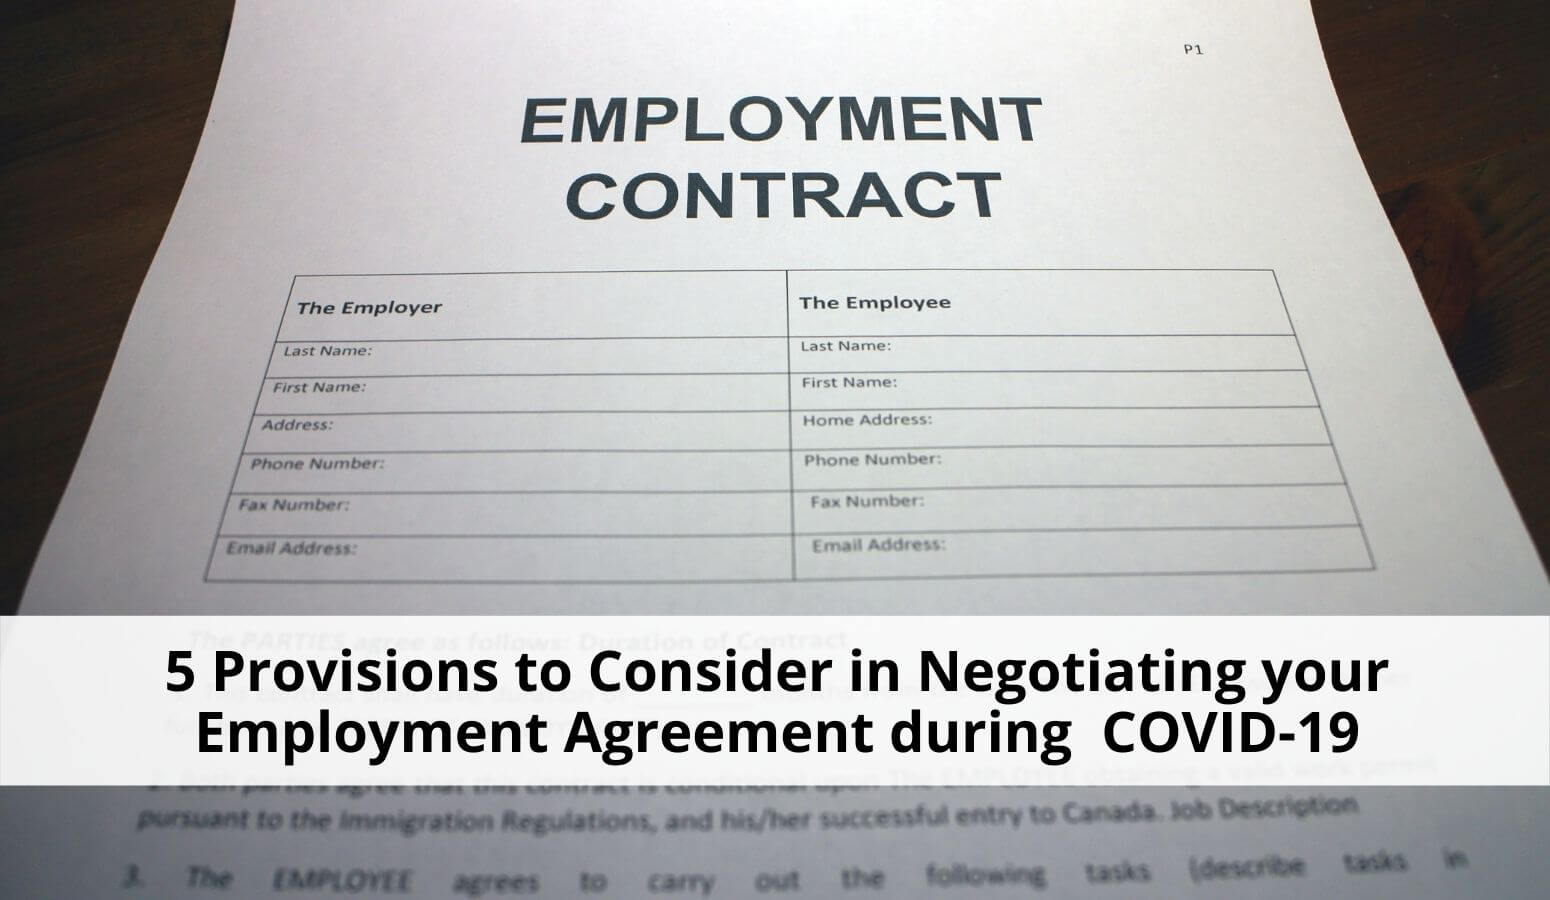 Negotiating your employment agreement during COVID-19